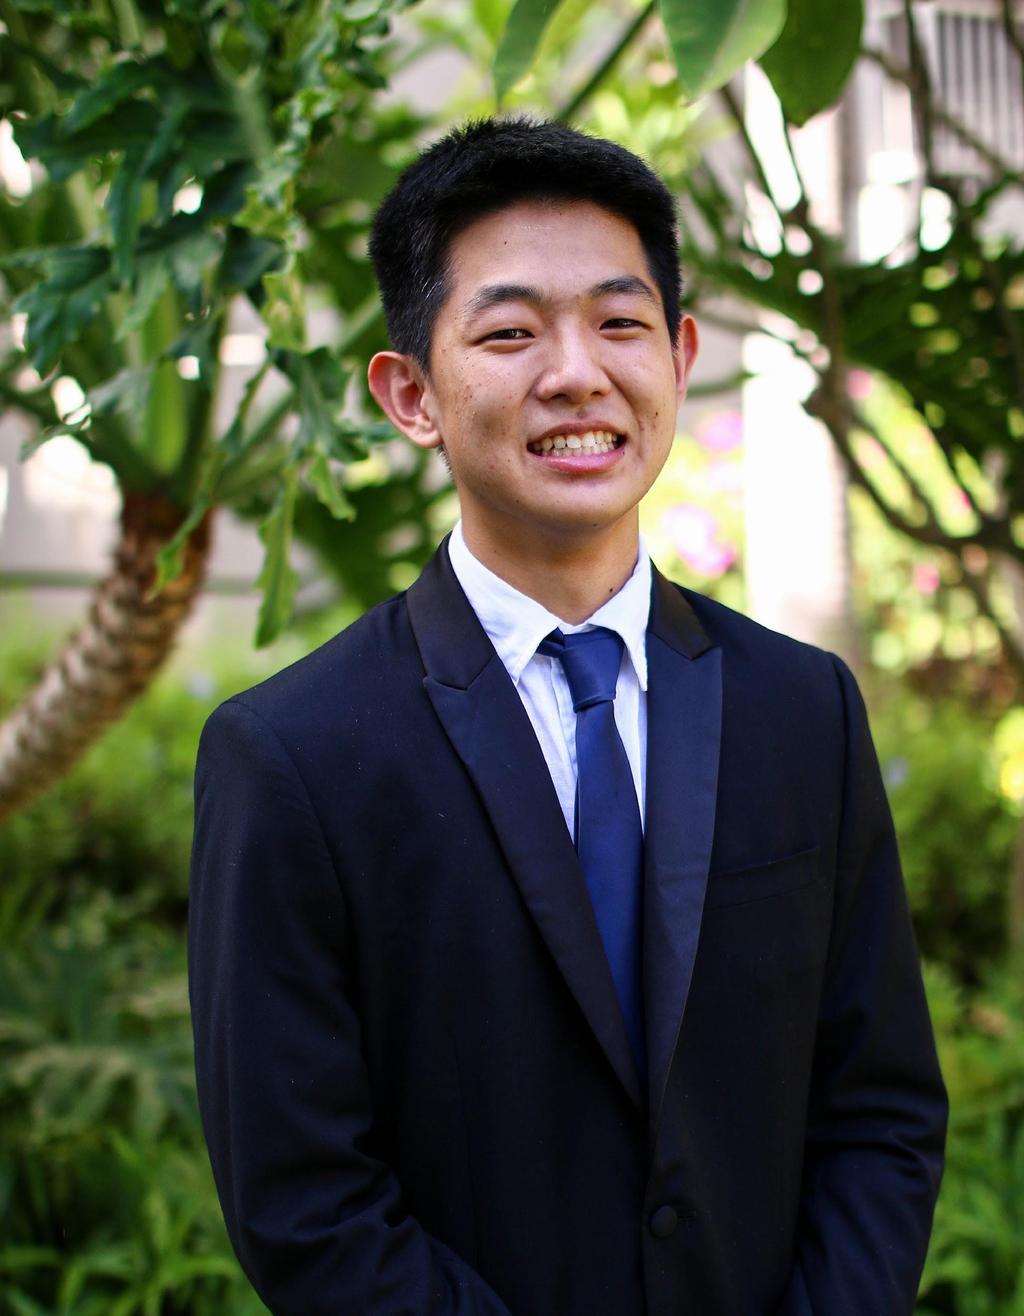 Hey AC! Welcome back to school! My name is Michael Jitchaku, but you can call me just Mike if you prefer. I currently represent AC as the President for the next school year.